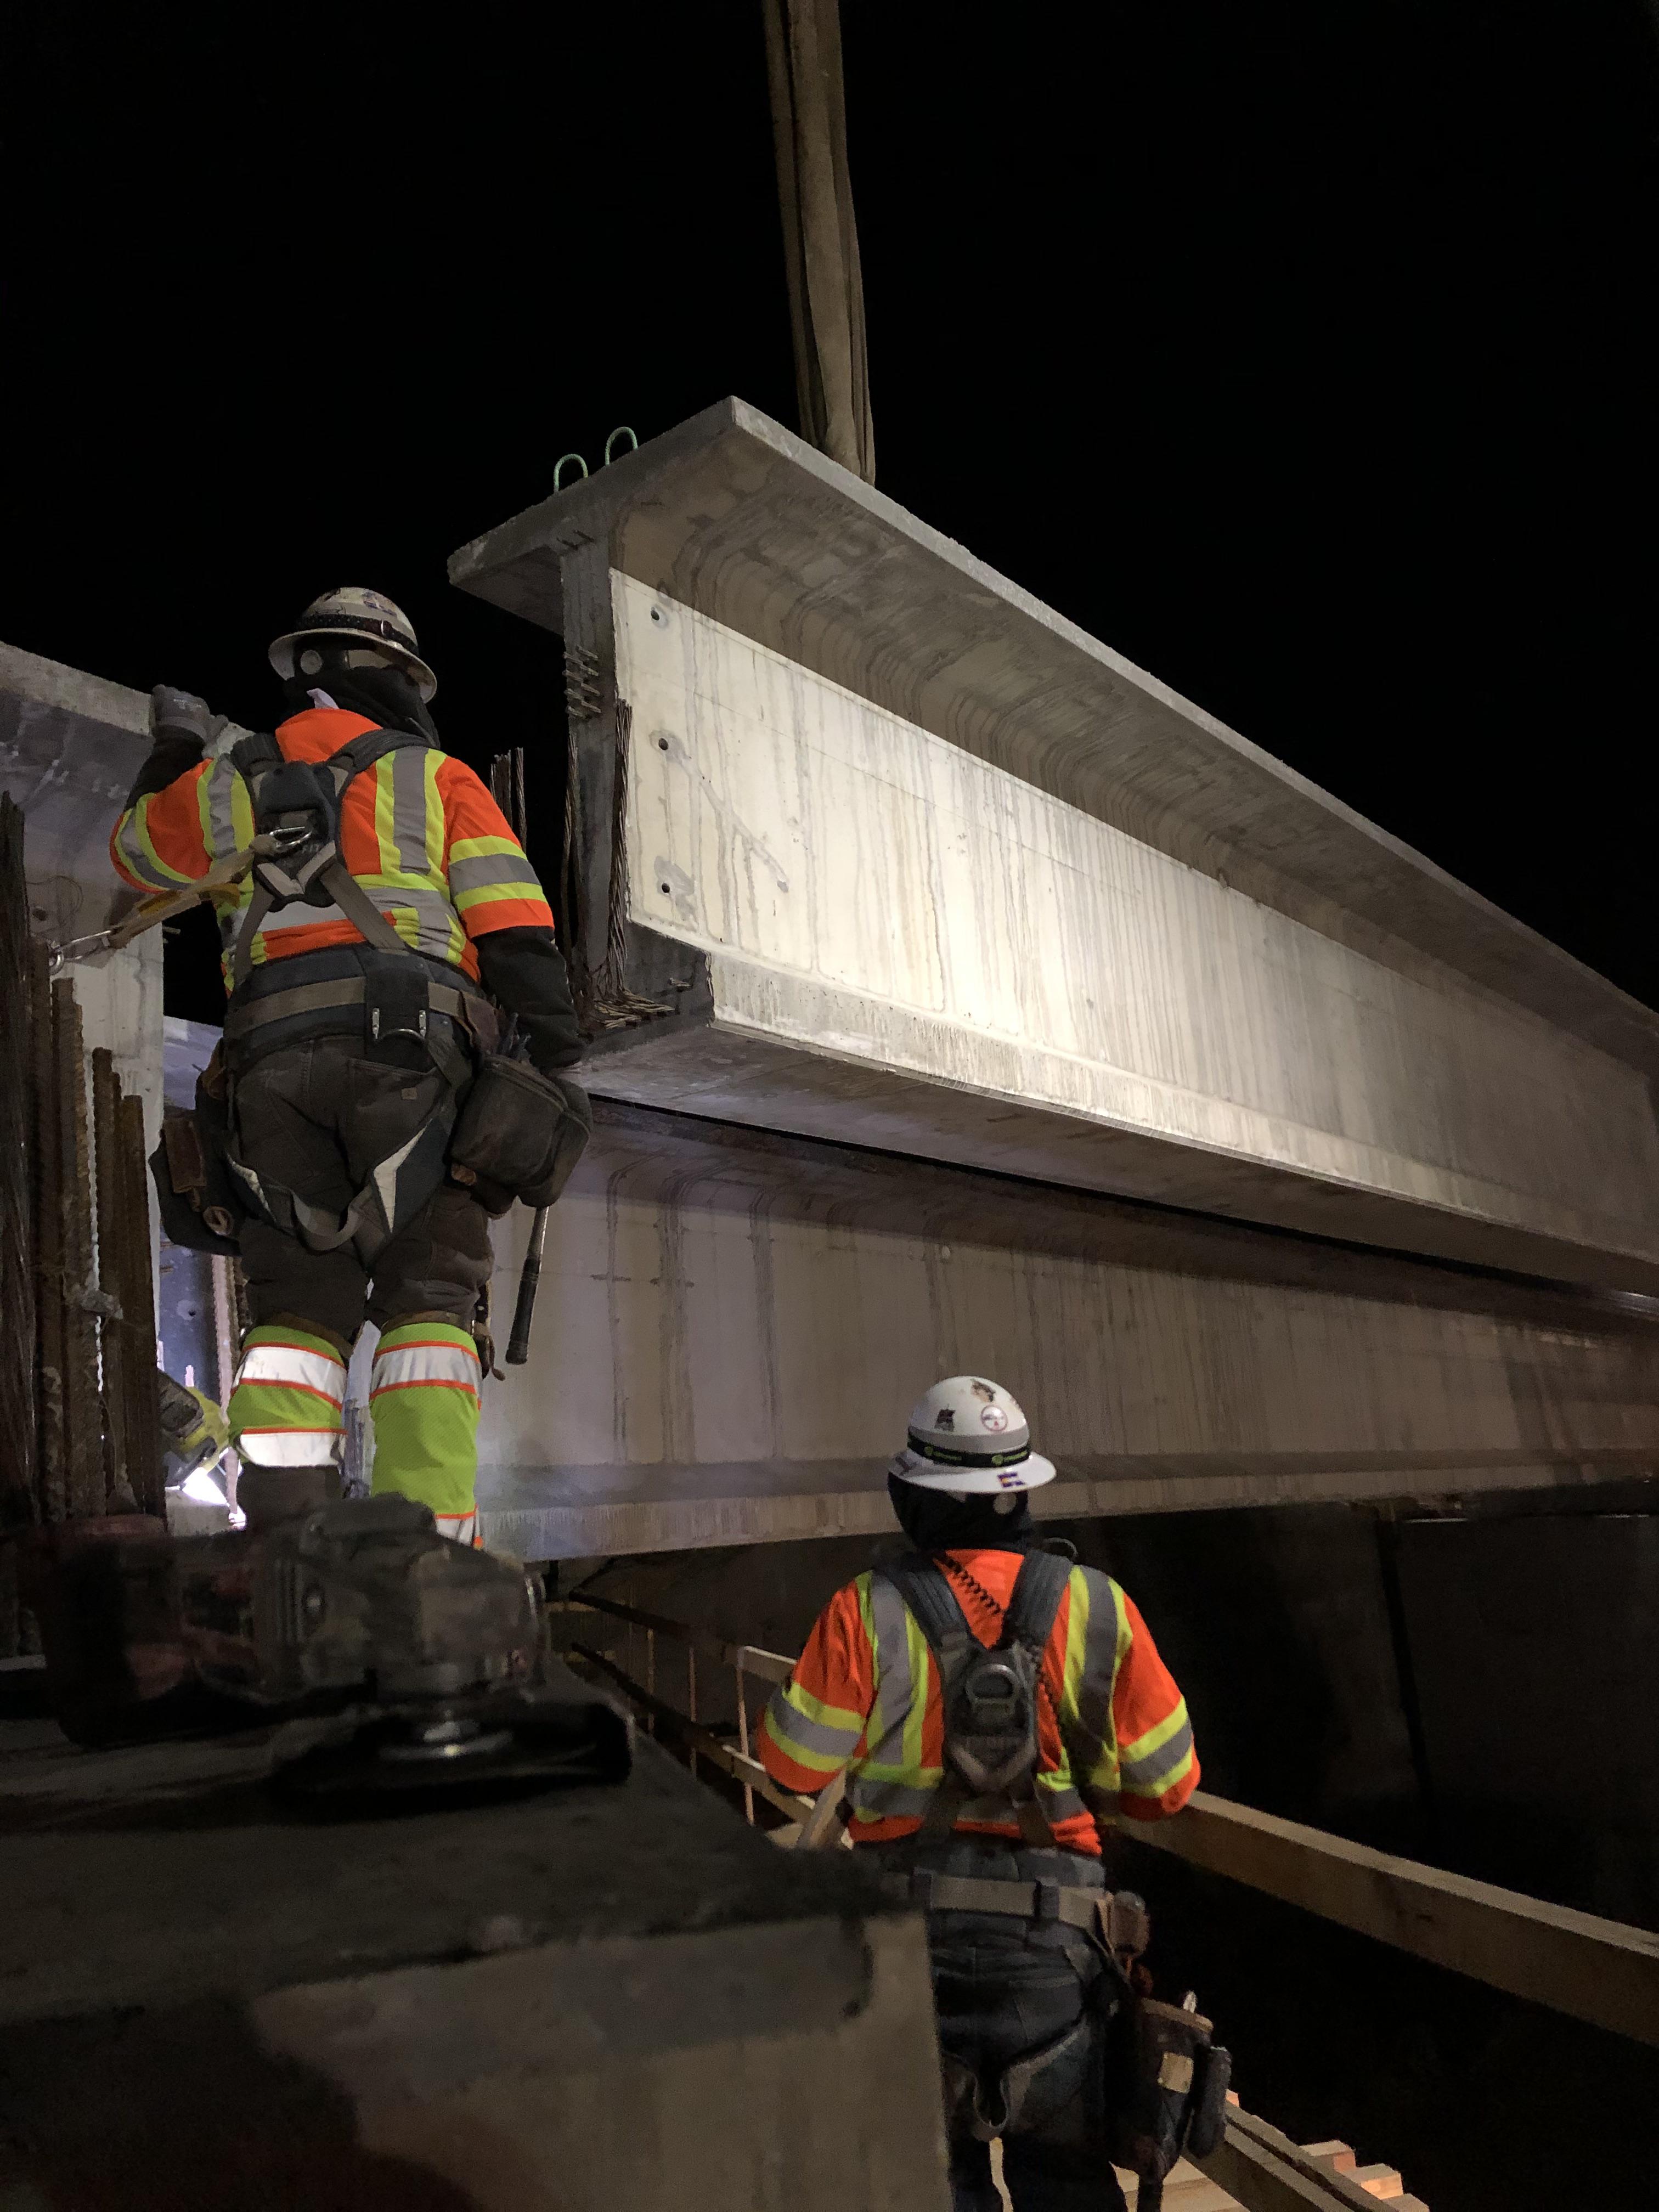 I-25 Segments 7 & 8 - Construction Crews Working on Support Beams Overnight Work detail image